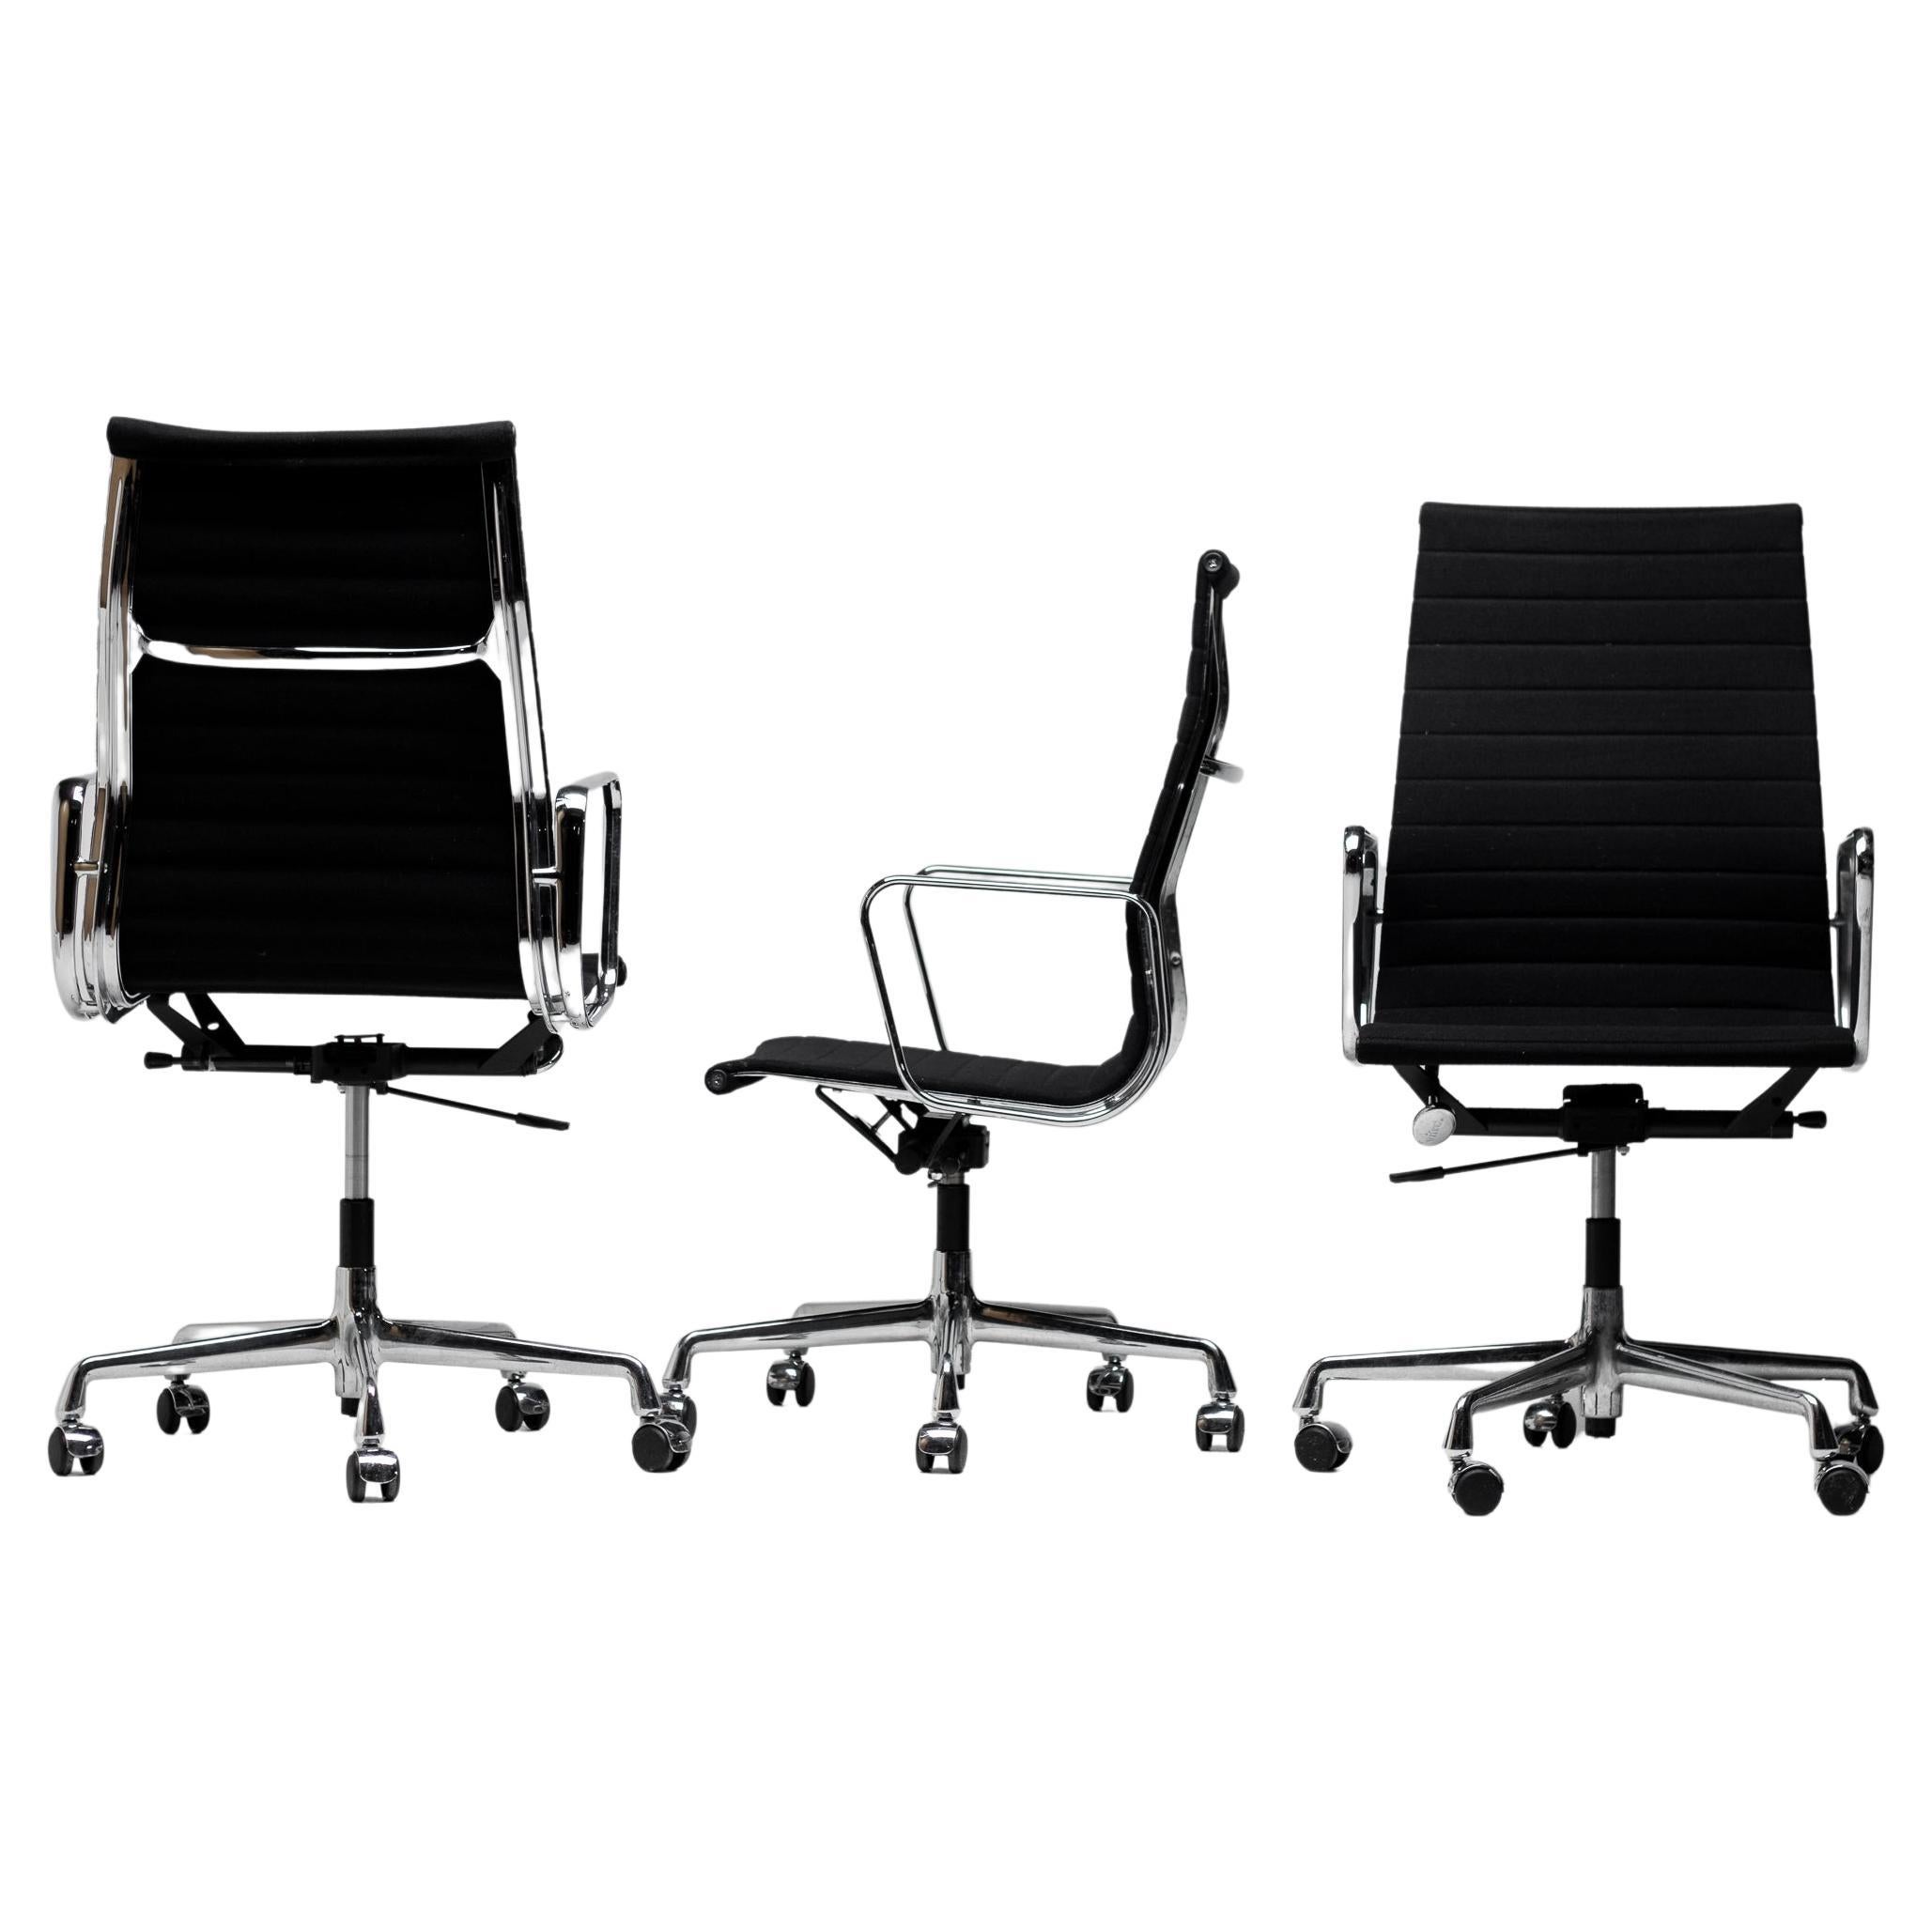 Charles & Ray Eames EA119 Executive Office Chairs by Vitra